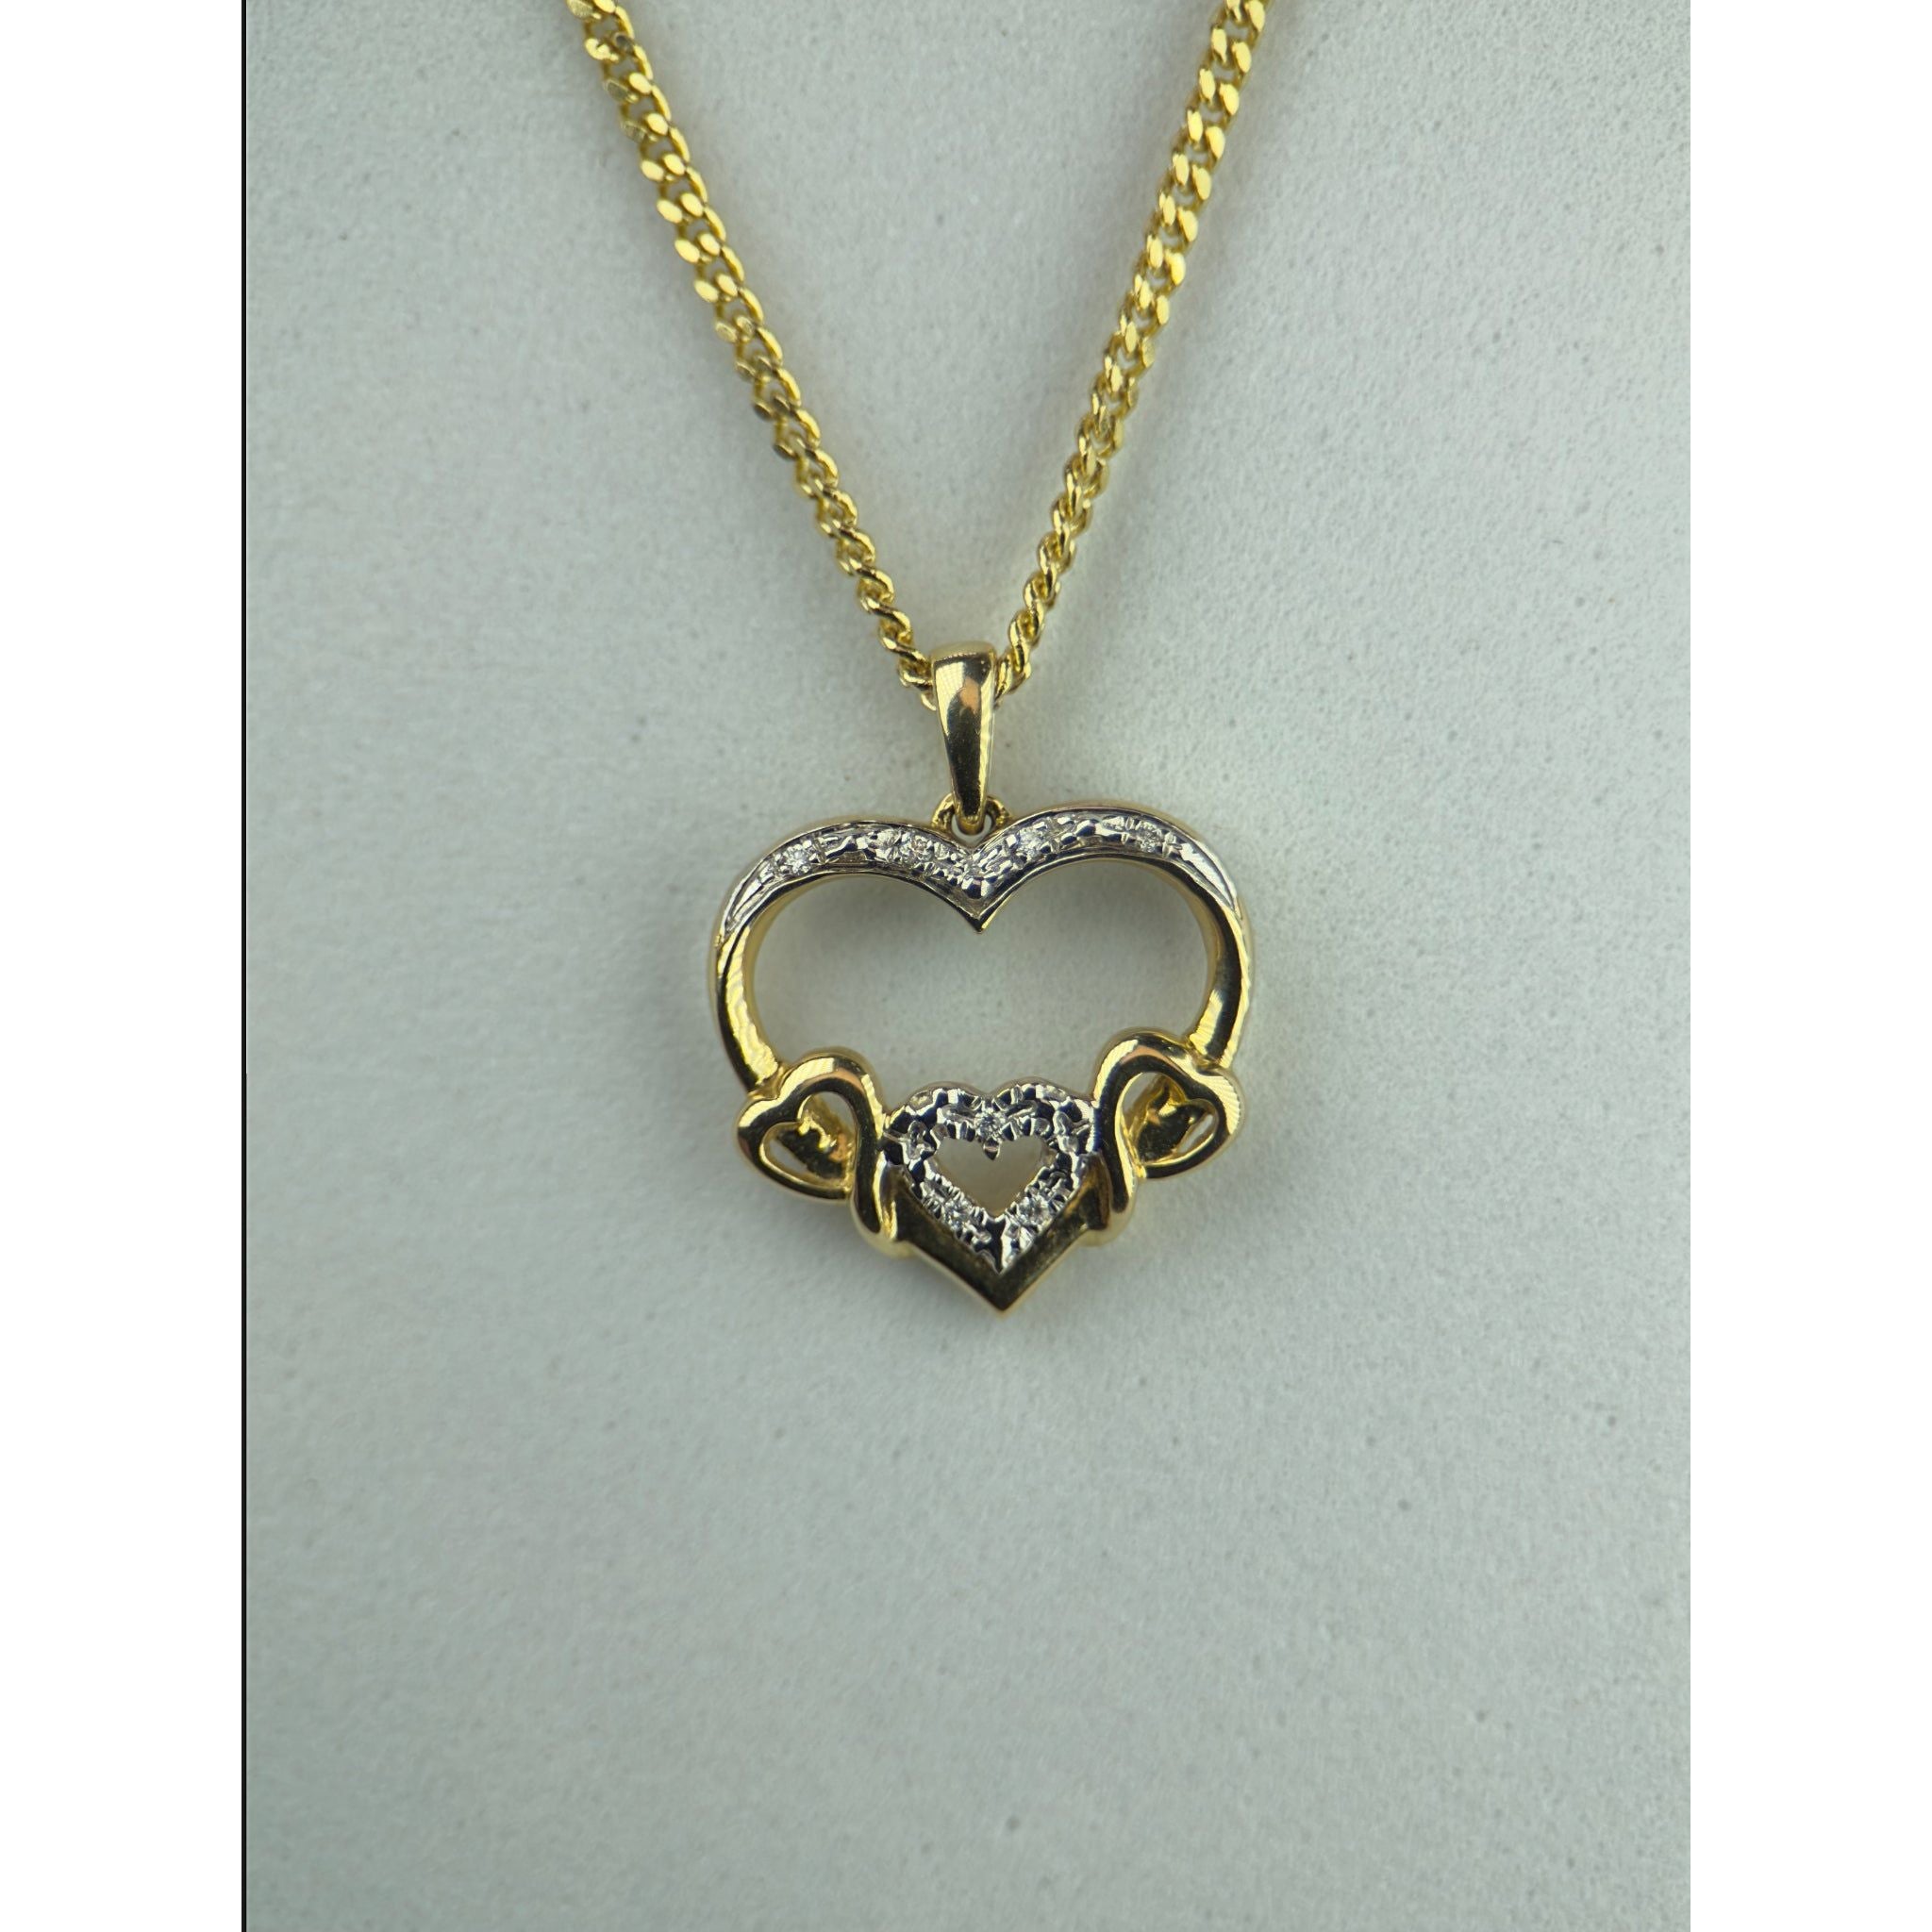 DR2210 - 14K Yellow Gold - Diamond - Pendant and Chain